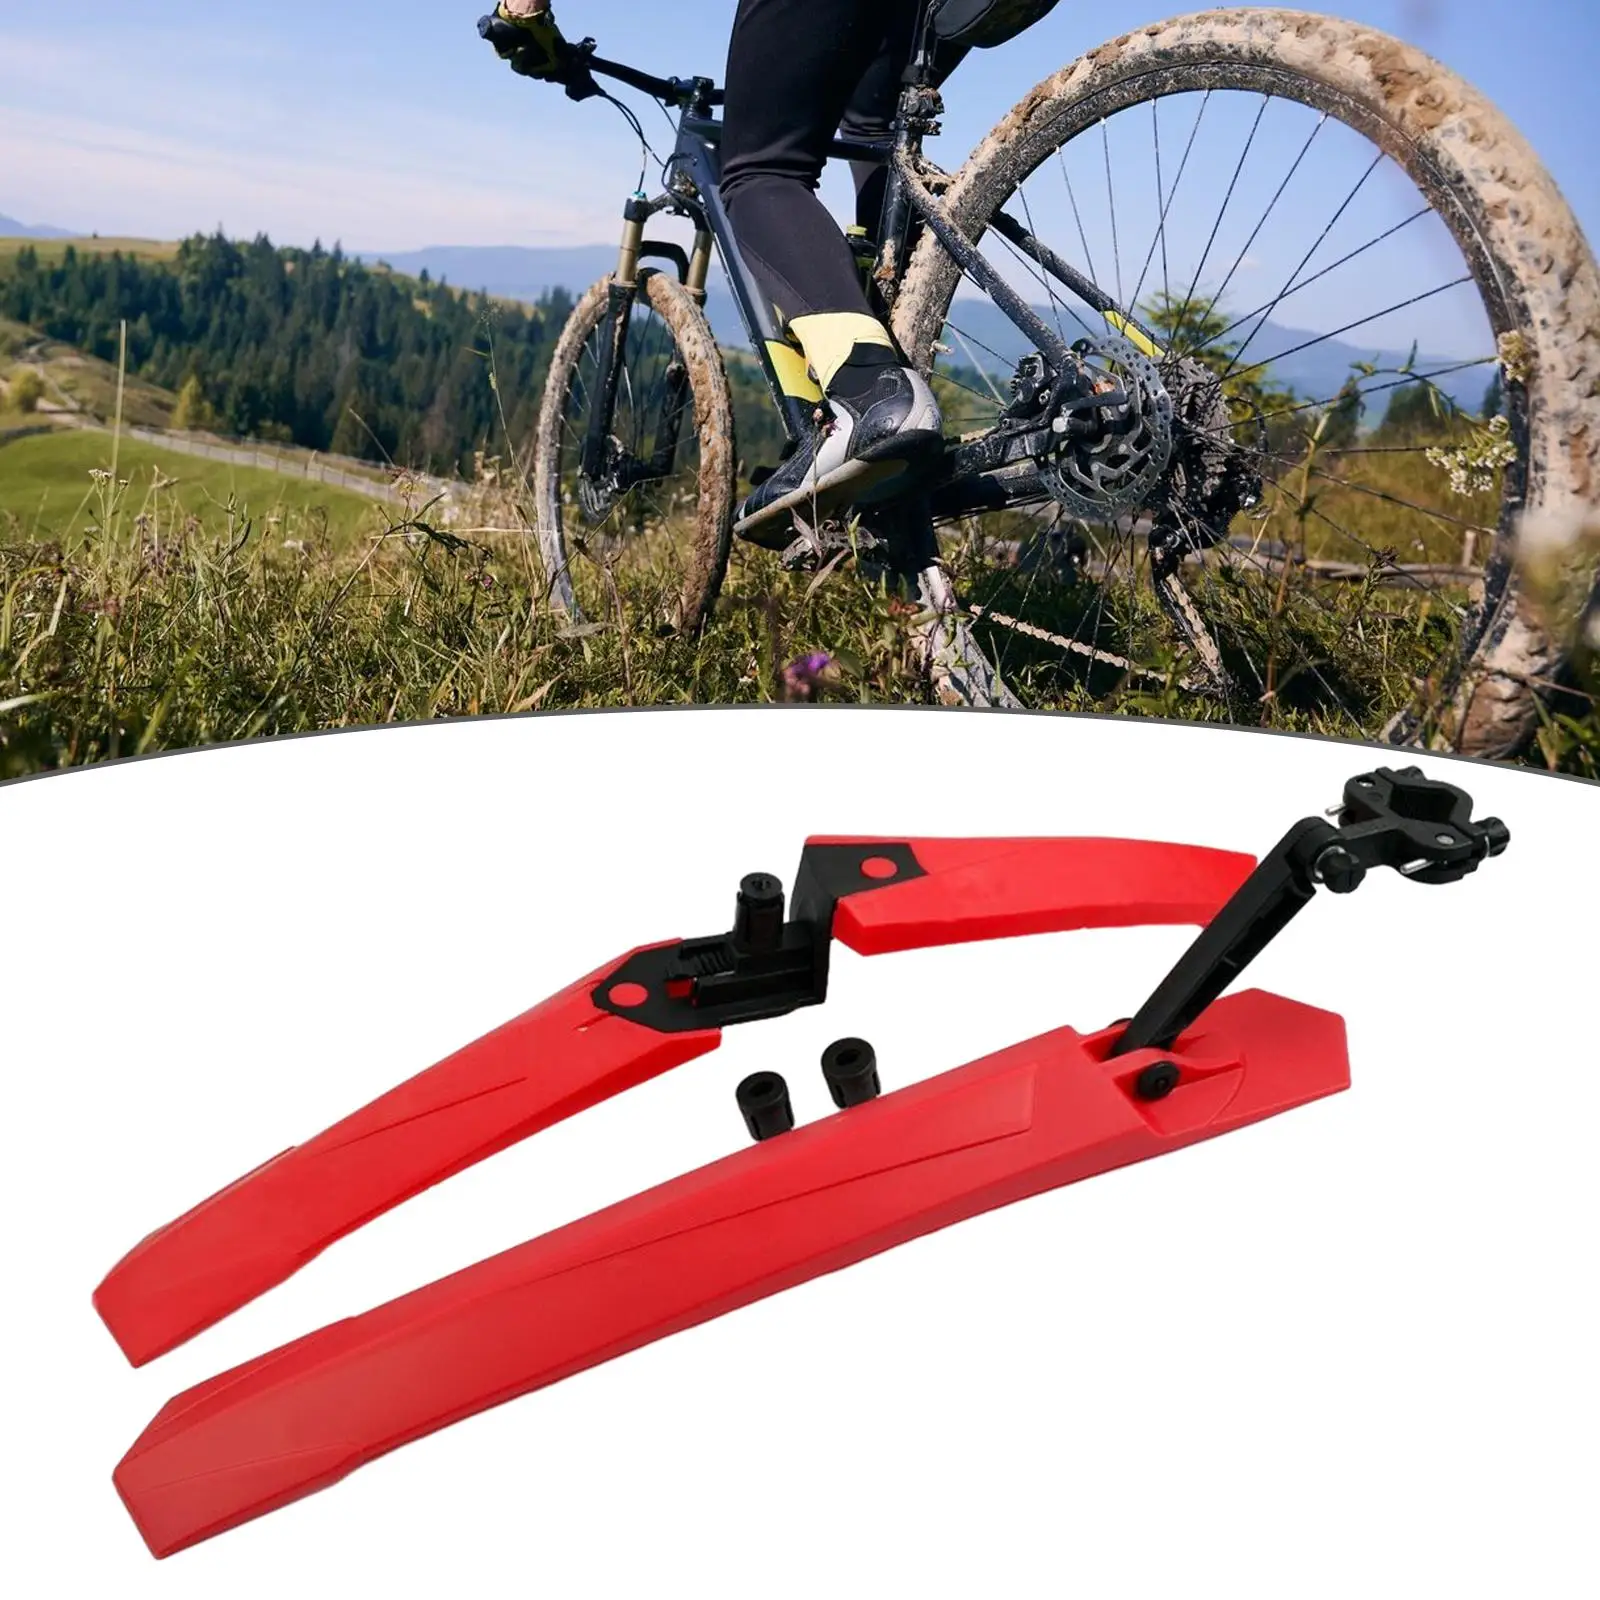 Bike Mudguard Front Rear Set Easy to Install Durable Front Rear Fenders for Outdoor Cycling Riding Mountain Bike Equipment